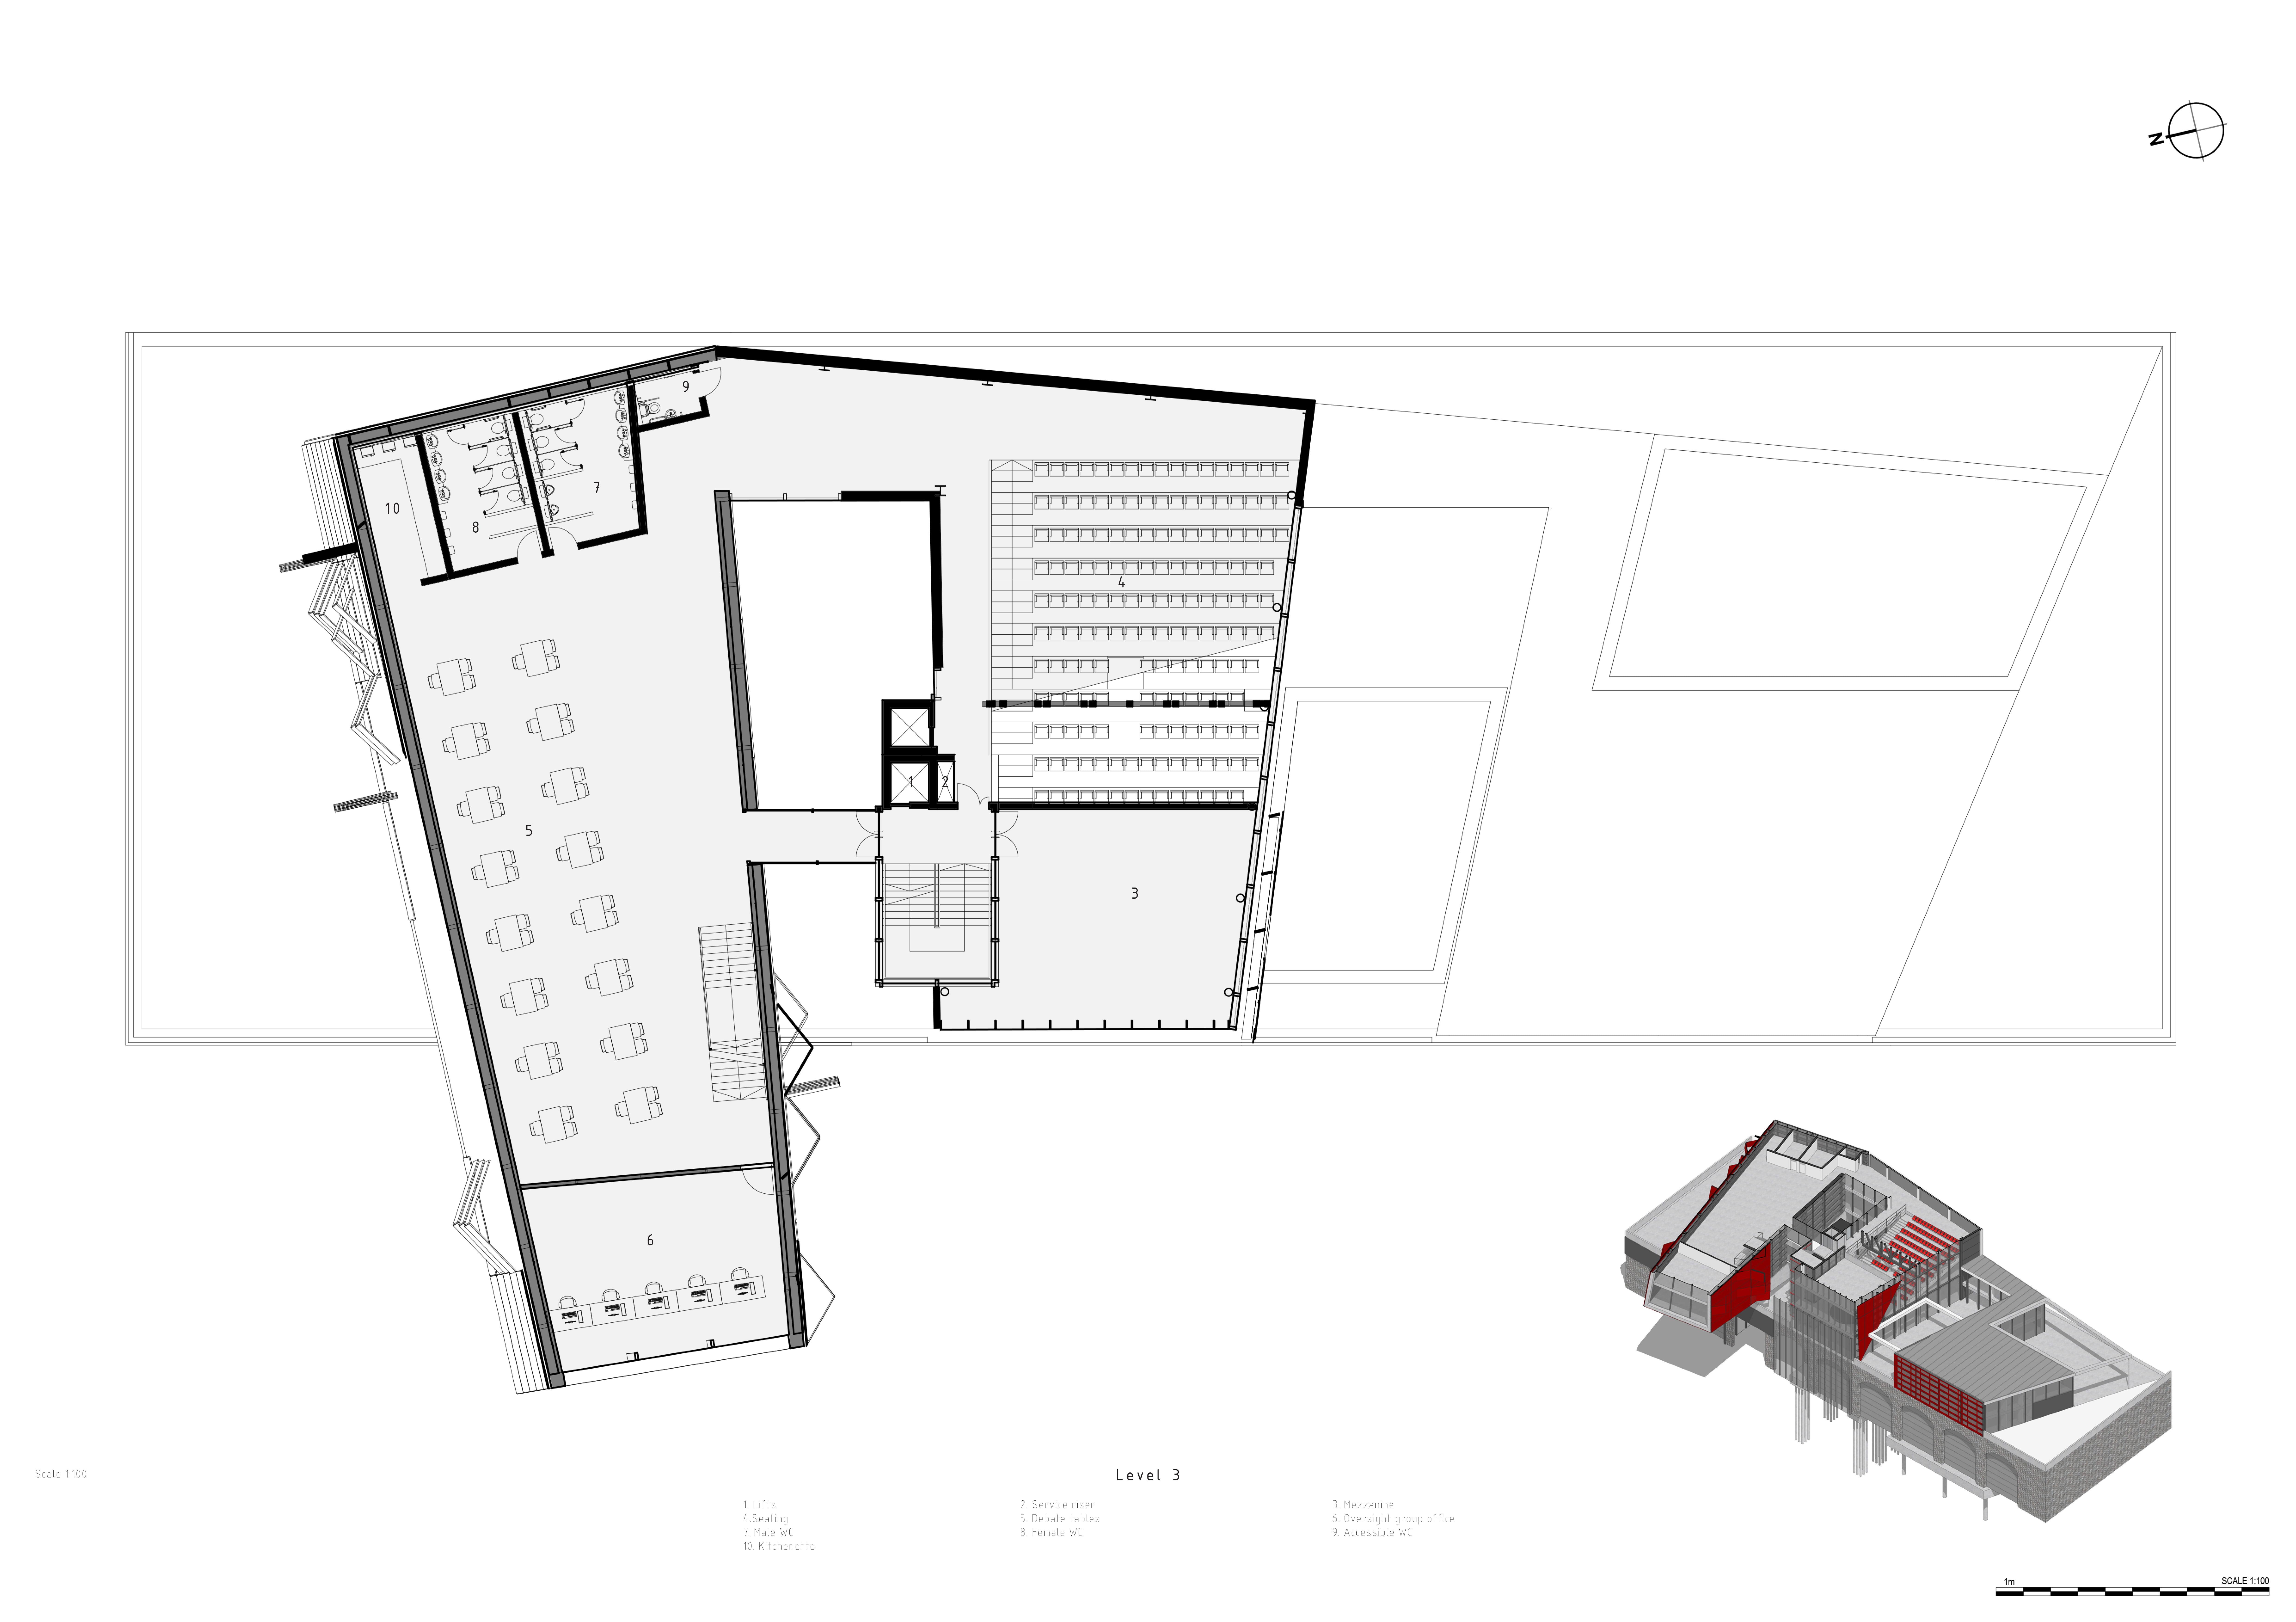 Level 3 - Showing the relationship between the lecture theatre, public debate forum and oversight offices.